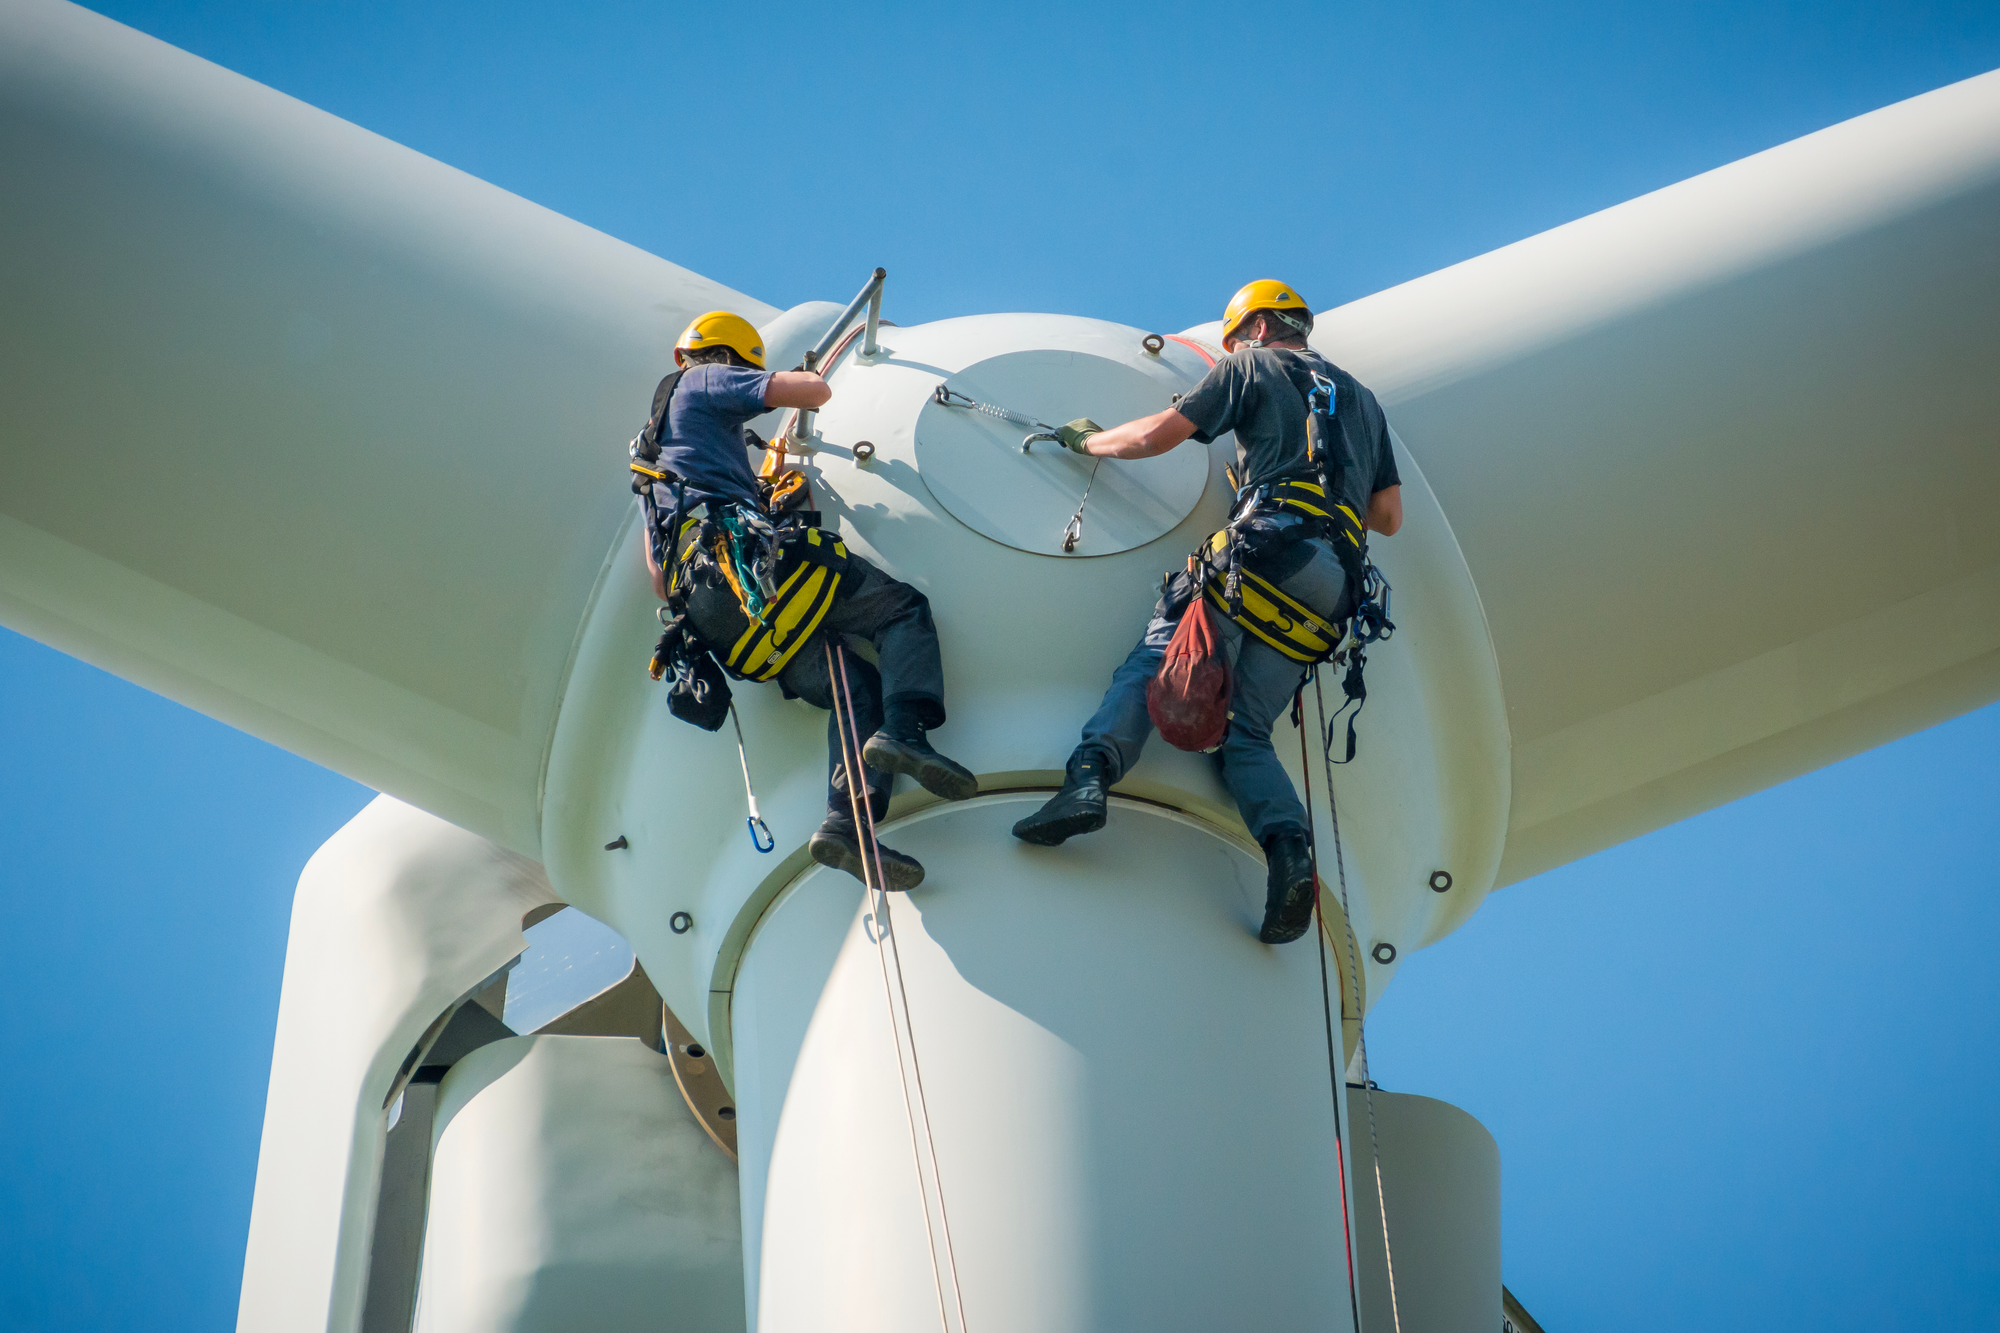 Two individuals and business working on a wind turbine, symbolizing their involvement in the wind energy sector.